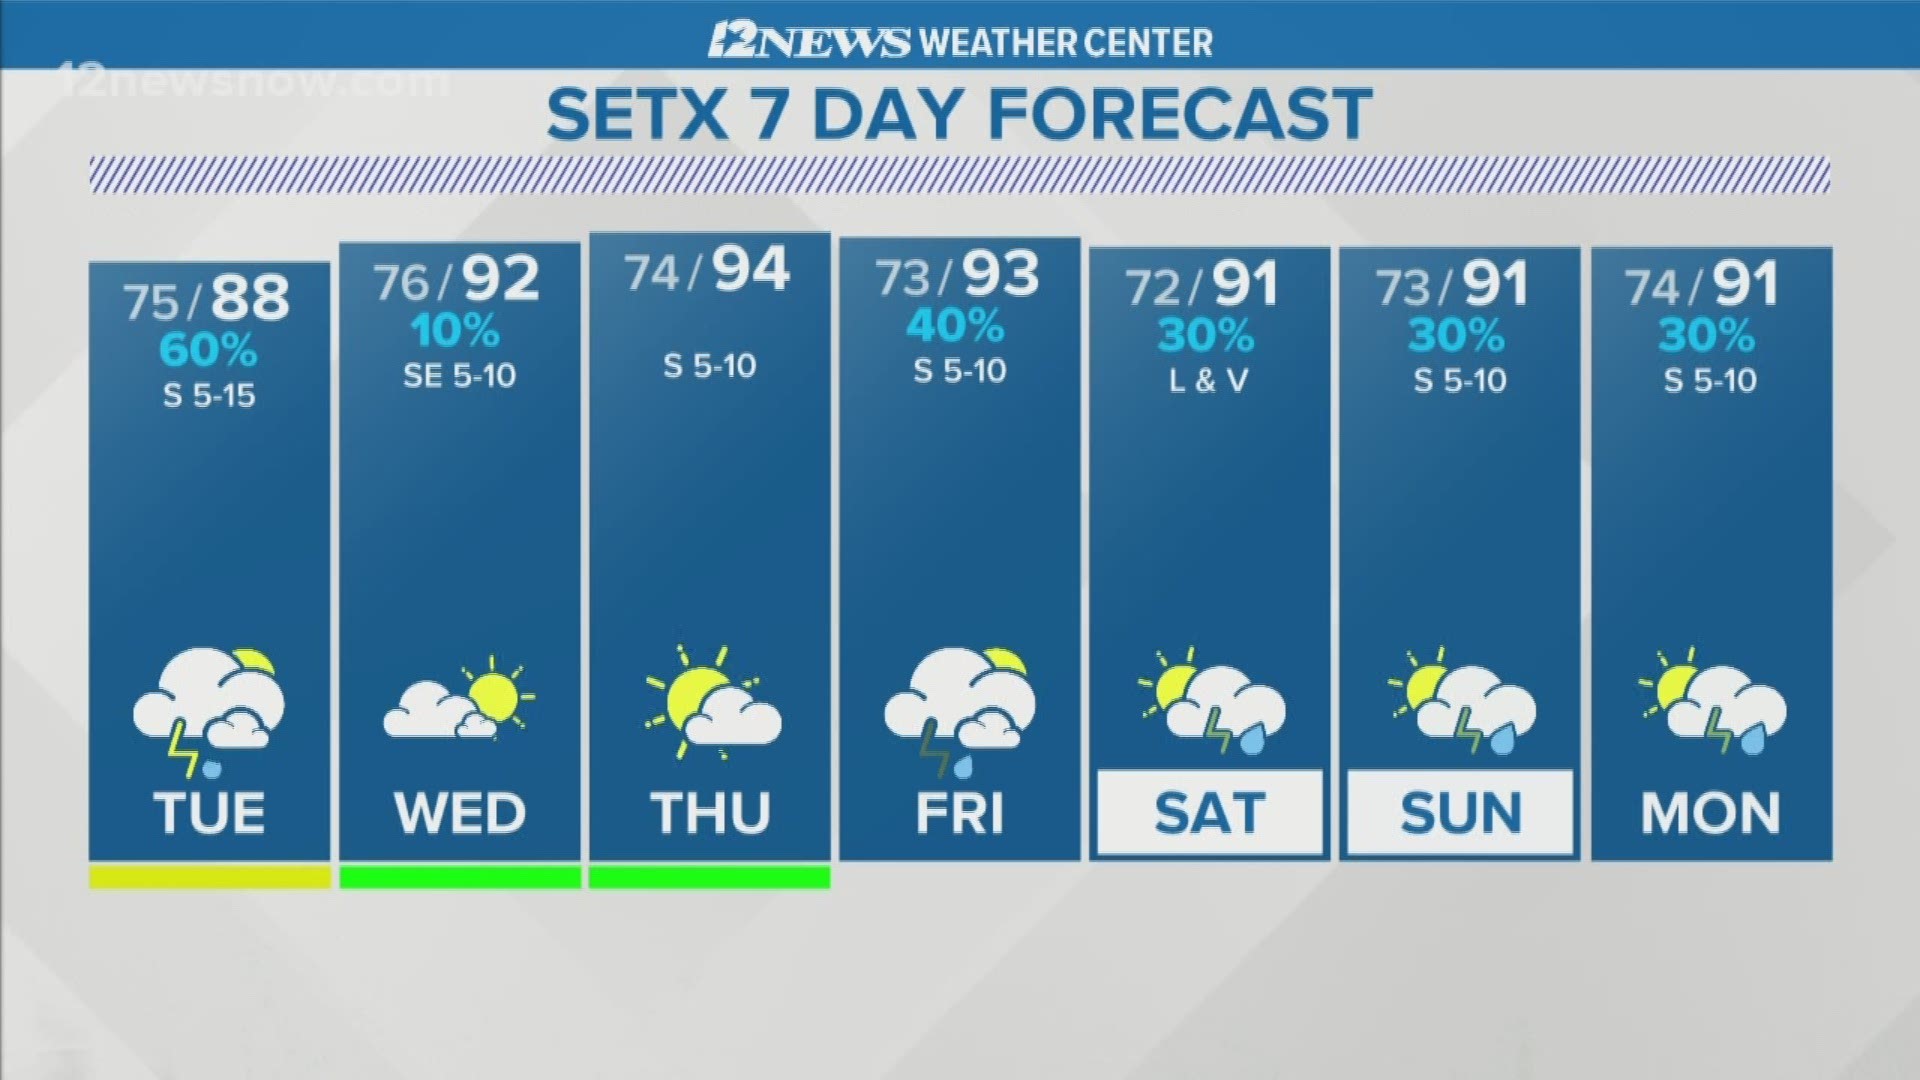 Hot and humid weather returns on Wednesday and Thursday